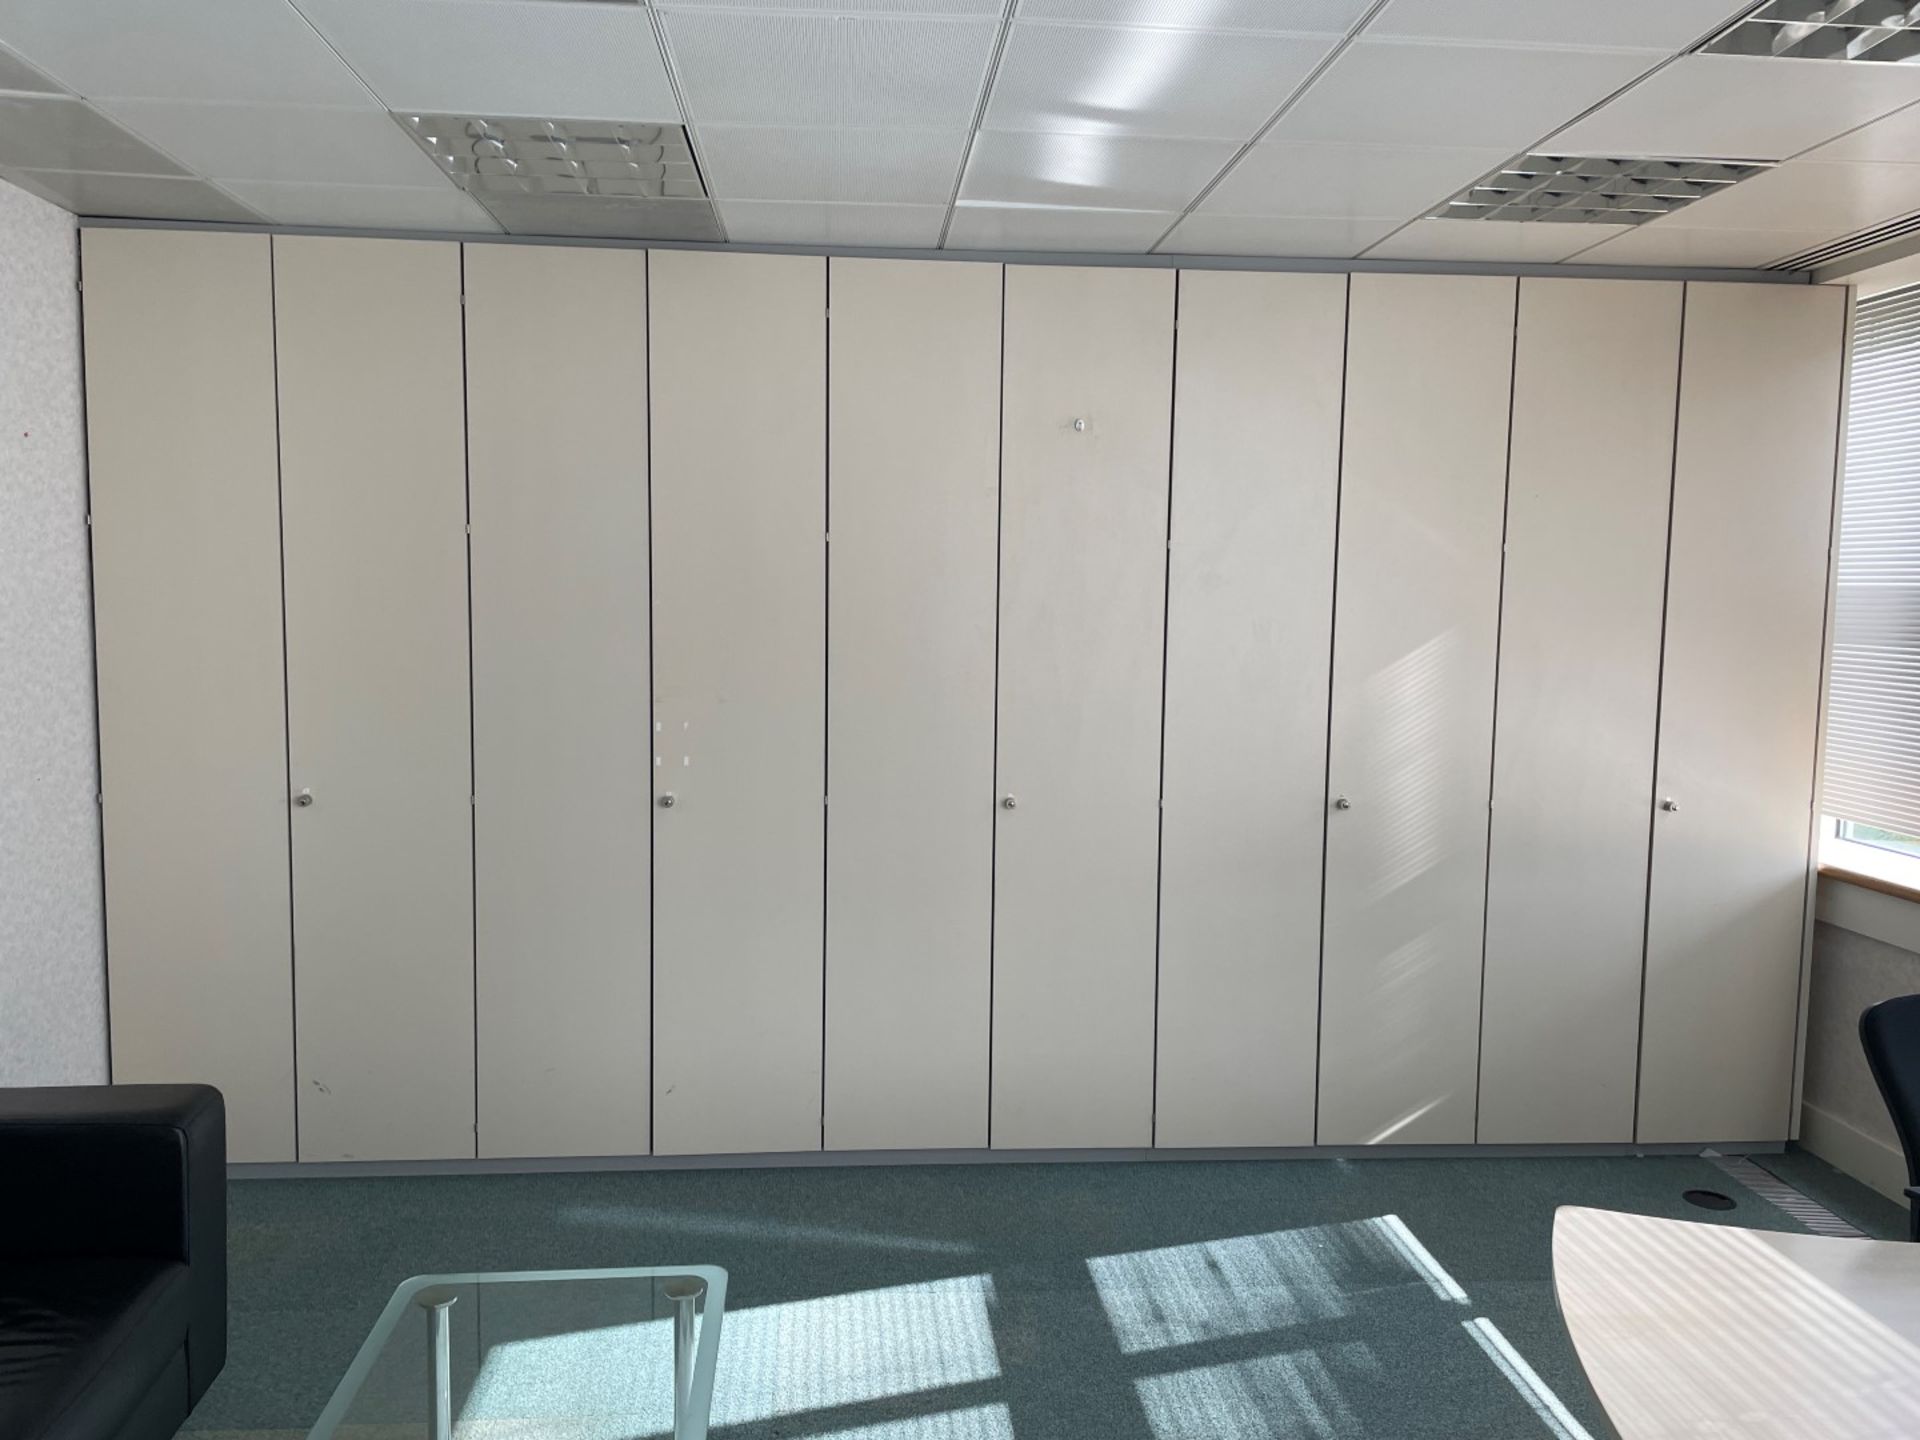 5 x Double Doors Storage Units - Each Measures W50 x H260 x D38cm - Ref: ED159C - To Be Removed From